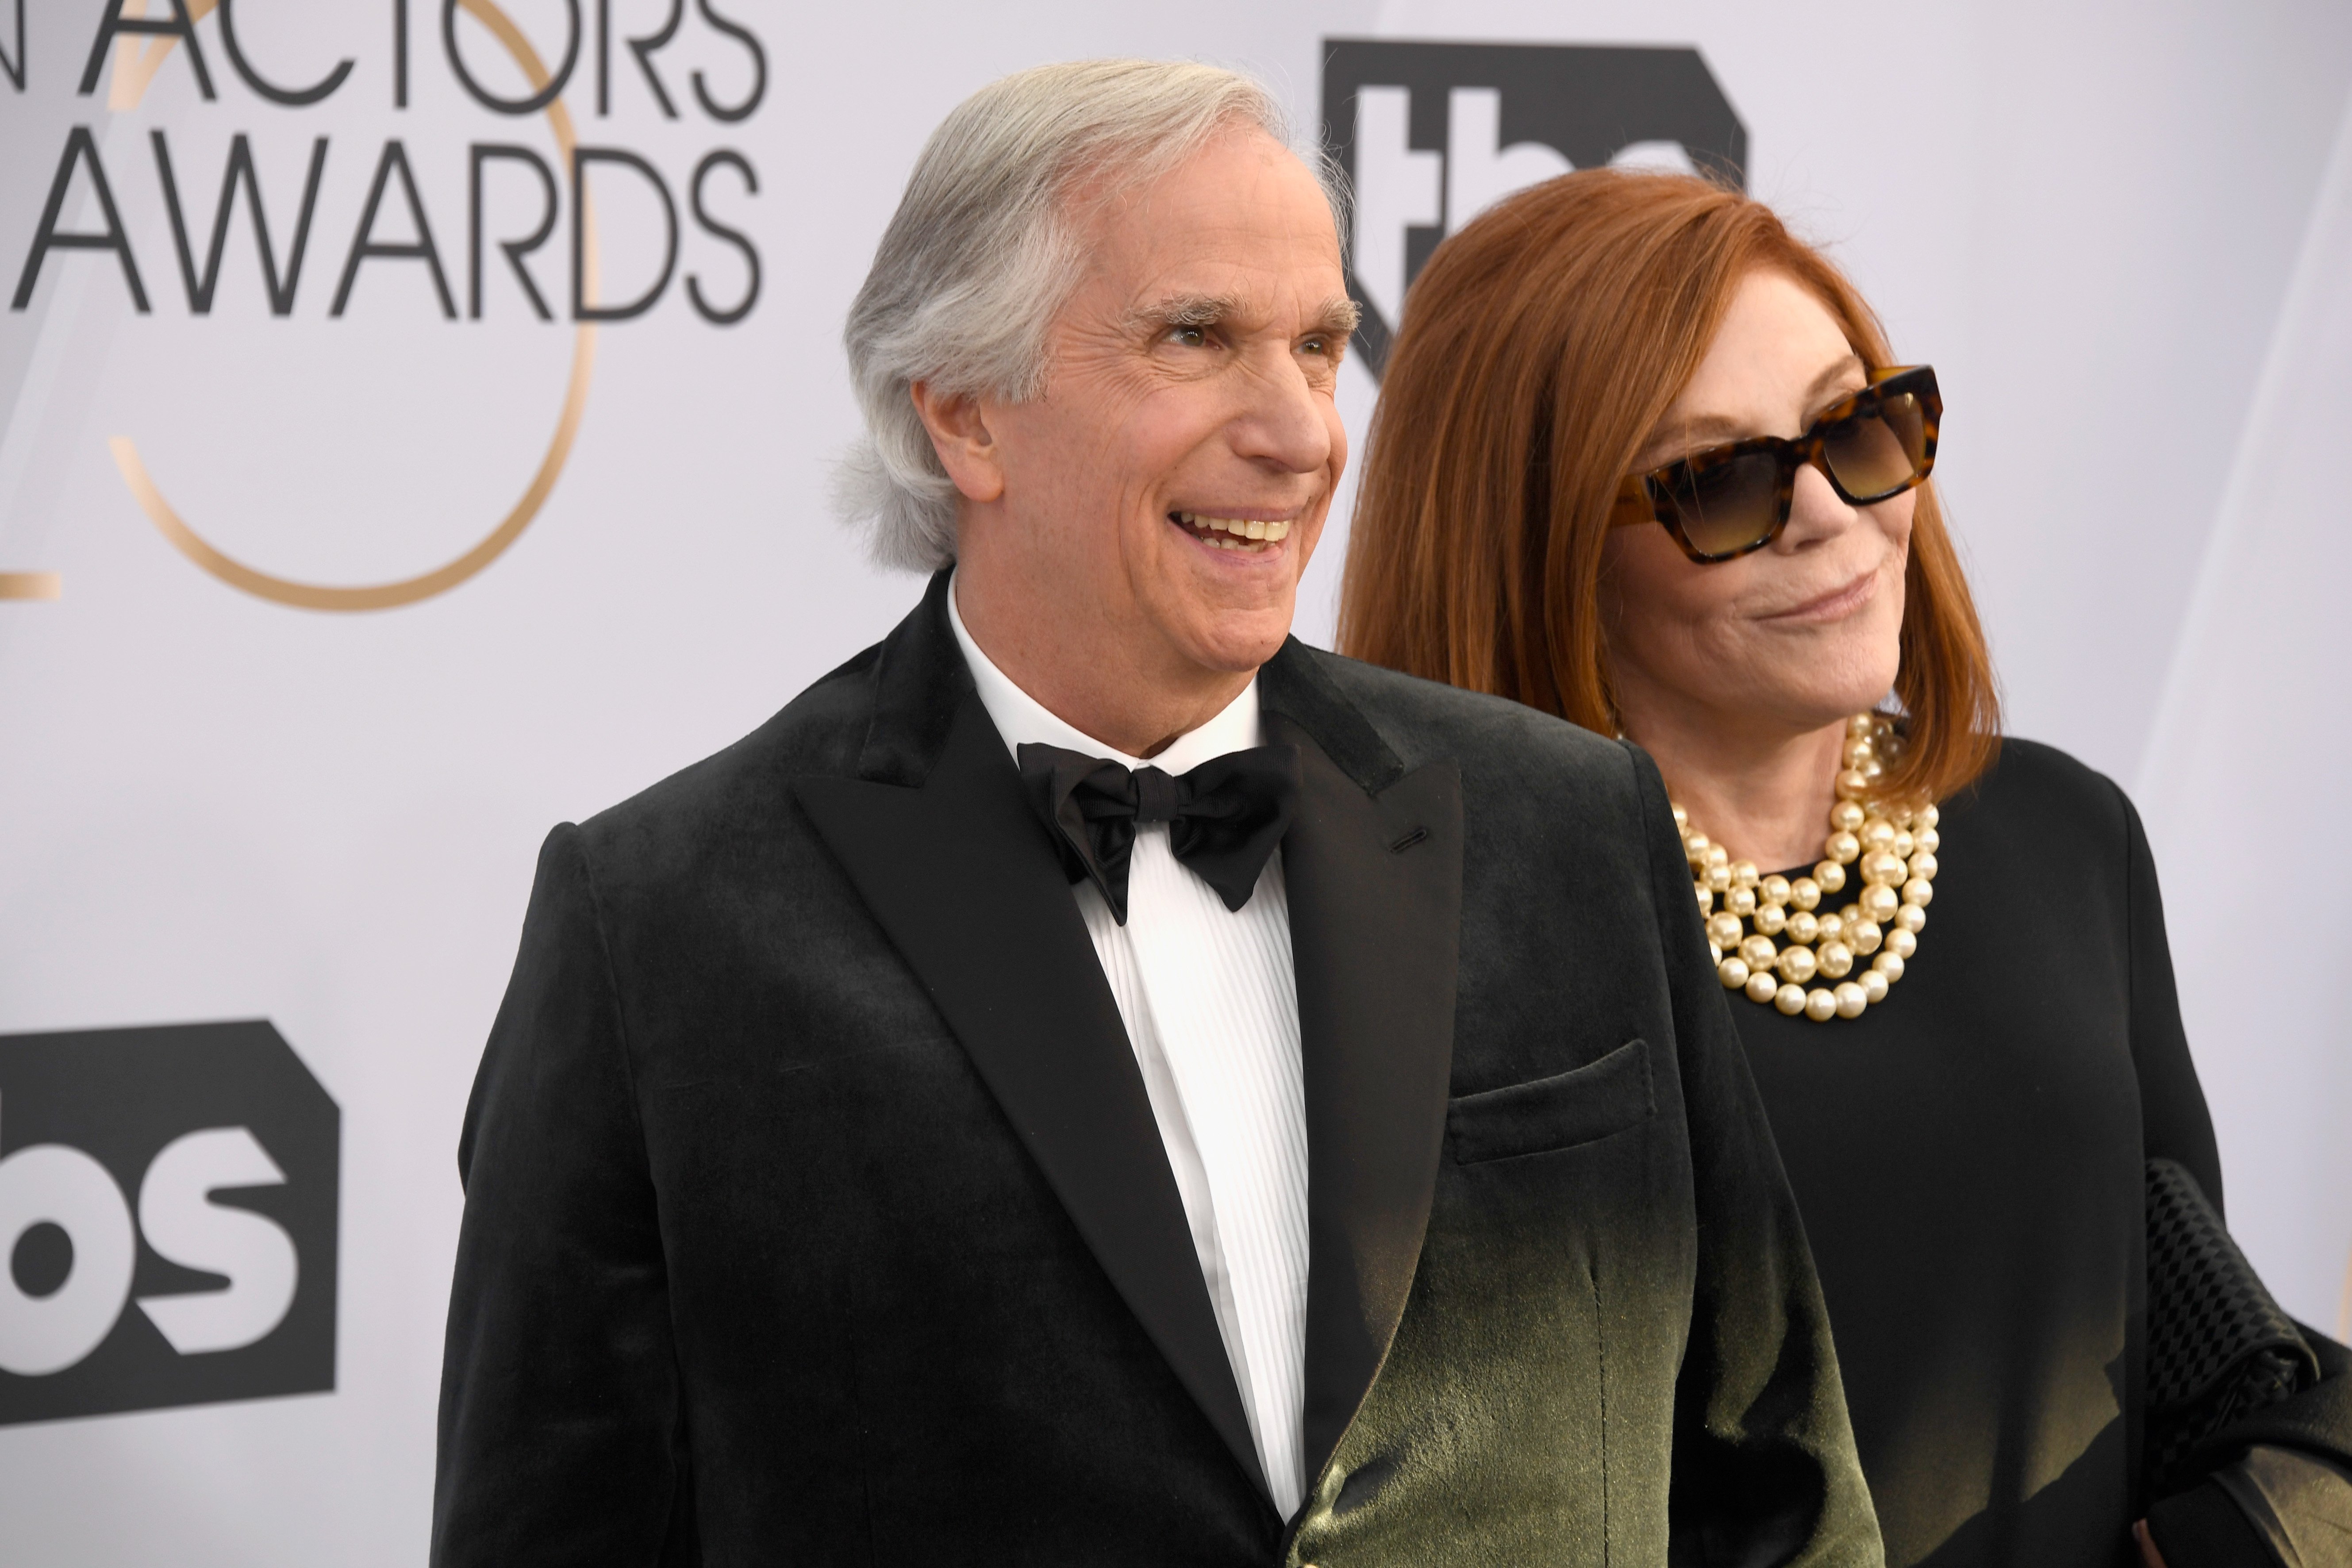 Henry Winkler and Stacey Winkler attend the 25th Annual Screen Actors Guild Awards at The Shrine Auditorium on January 27, 2019 in Los Angeles, California. | Source: Getty Images